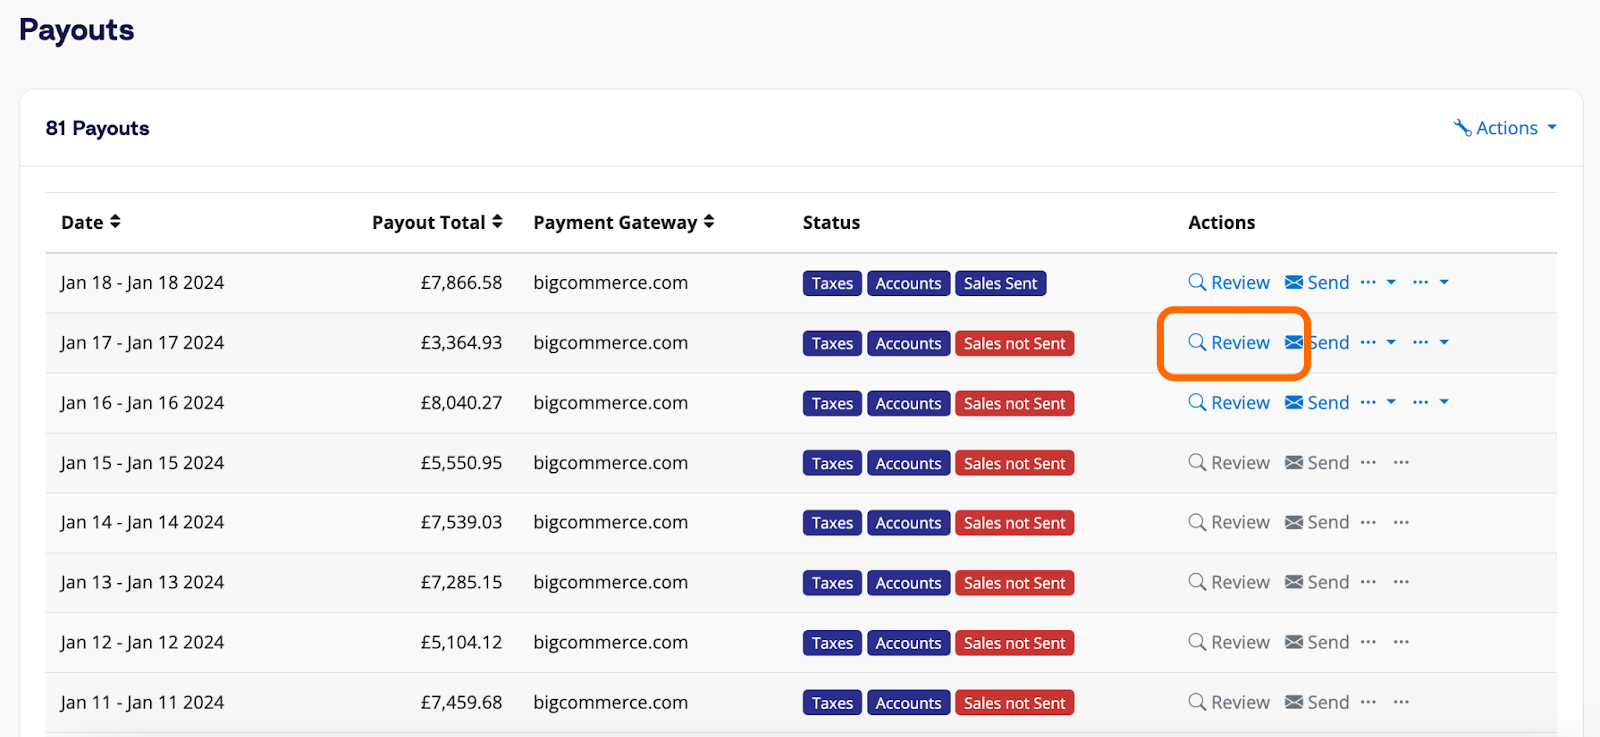 The A2X Payouts page